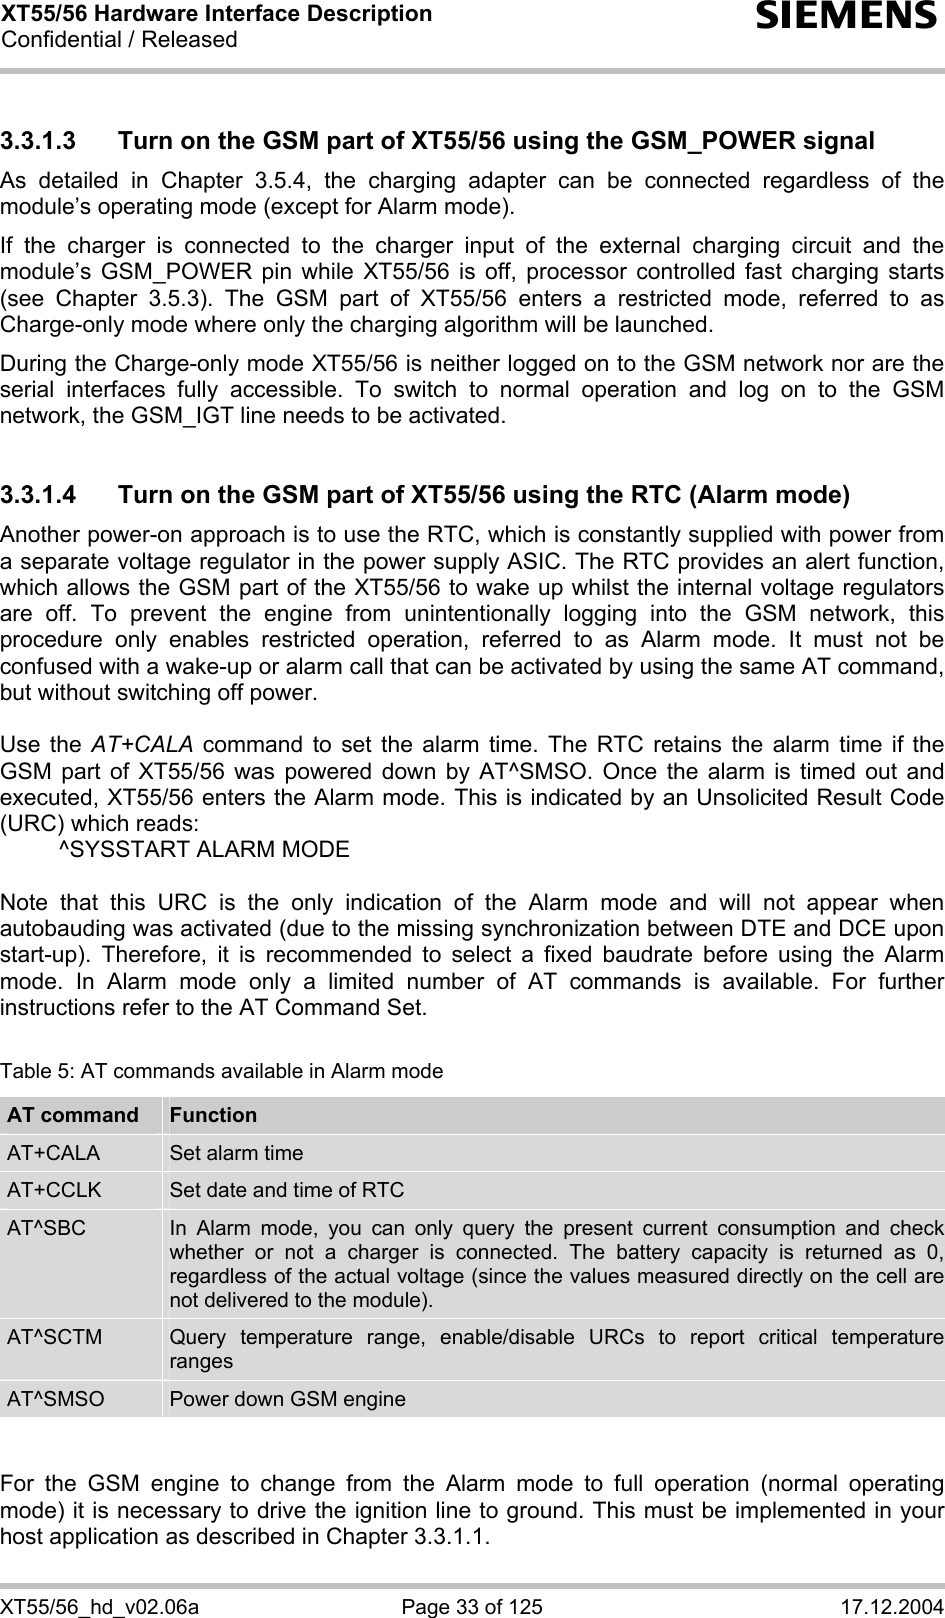 XT55/56 Hardware Interface Description Confidential / Released s XT55/56_hd_v02.06a  Page 33 of 125  17.12.2004 3.3.1.3  Turn on the GSM part of XT55/56 using the GSM_POWER signal As detailed in Chapter 3.5.4, the charging adapter can be connected regardless of the module’s operating mode (except for Alarm mode).  If the charger is connected to the charger input of the external charging circuit and the module’s GSM_POWER pin while XT55/56 is off, processor controlled fast charging starts (see Chapter 3.5.3). The GSM part of XT55/56 enters a restricted mode, referred to as Charge-only mode where only the charging algorithm will be launched. During the Charge-only mode XT55/56 is neither logged on to the GSM network nor are the serial interfaces fully accessible. To switch to normal operation and log on to the GSM network, the GSM_IGT line needs to be activated.  3.3.1.4  Turn on the GSM part of XT55/56 using the RTC (Alarm mode) Another power-on approach is to use the RTC, which is constantly supplied with power from a separate voltage regulator in the power supply ASIC. The RTC provides an alert function, which allows the GSM part of the XT55/56 to wake up whilst the internal voltage regulators are off. To prevent the engine from unintentionally logging into the GSM network, this procedure only enables restricted operation, referred to as Alarm mode. It must not be confused with a wake-up or alarm call that can be activated by using the same AT command, but without switching off power.  Use the AT+CALA command to set the alarm time. The RTC retains the alarm time if the GSM part of XT55/56 was powered down by AT^SMSO. Once the alarm is timed out and executed, XT55/56 enters the Alarm mode. This is indicated by an Unsolicited Result Code (URC) which reads:   ^SYSSTART ALARM MODE    Note that this URC is the only indication of the Alarm mode and will not appear when autobauding was activated (due to the missing synchronization between DTE and DCE upon start-up). Therefore, it is recommended to select a fixed baudrate before using the Alarm mode. In Alarm mode only a limited number of AT commands is available. For further instructions refer to the AT Command Set.  Table 5: AT commands available in Alarm mode AT command  Function AT+CALA  Set alarm time AT+CCLK  Set date and time of RTC AT^SBC  In Alarm mode, you can only query the present current consumption and check whether or not a charger is connected. The battery capacity is returned as 0, regardless of the actual voltage (since the values measured directly on the cell are not delivered to the module). AT^SCTM  Query temperature range, enable/disable URCs to report critical temperature ranges AT^SMSO  Power down GSM engine   For the GSM engine to change from the Alarm mode to full operation (normal operating mode) it is necessary to drive the ignition line to ground. This must be implemented in your host application as described in Chapter 3.3.1.1. 